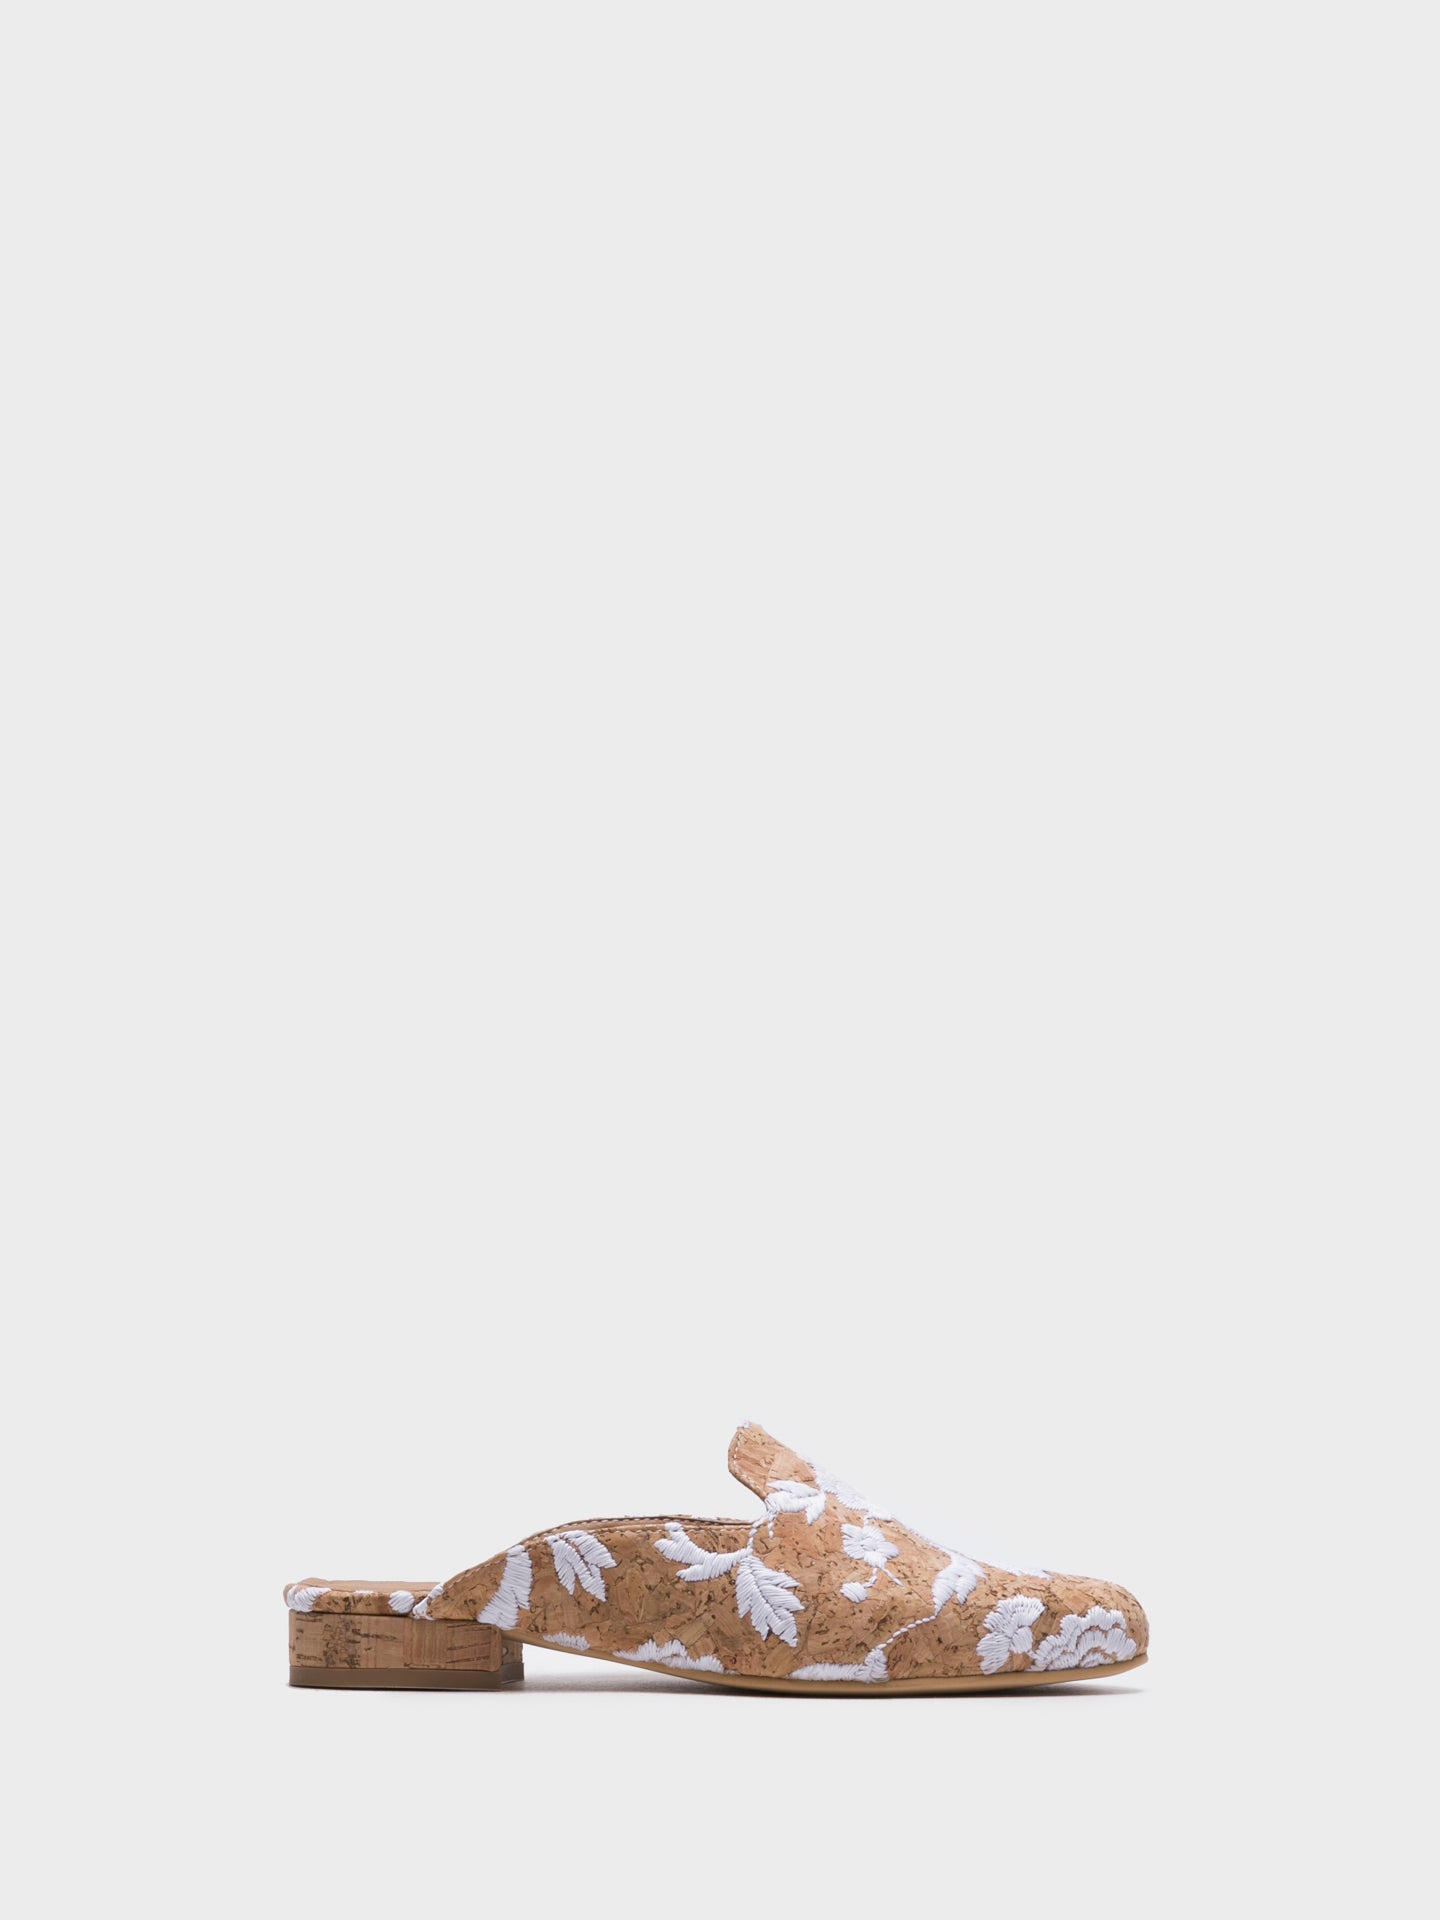 NAE Vegan Shoes Beige Embroidered Mules